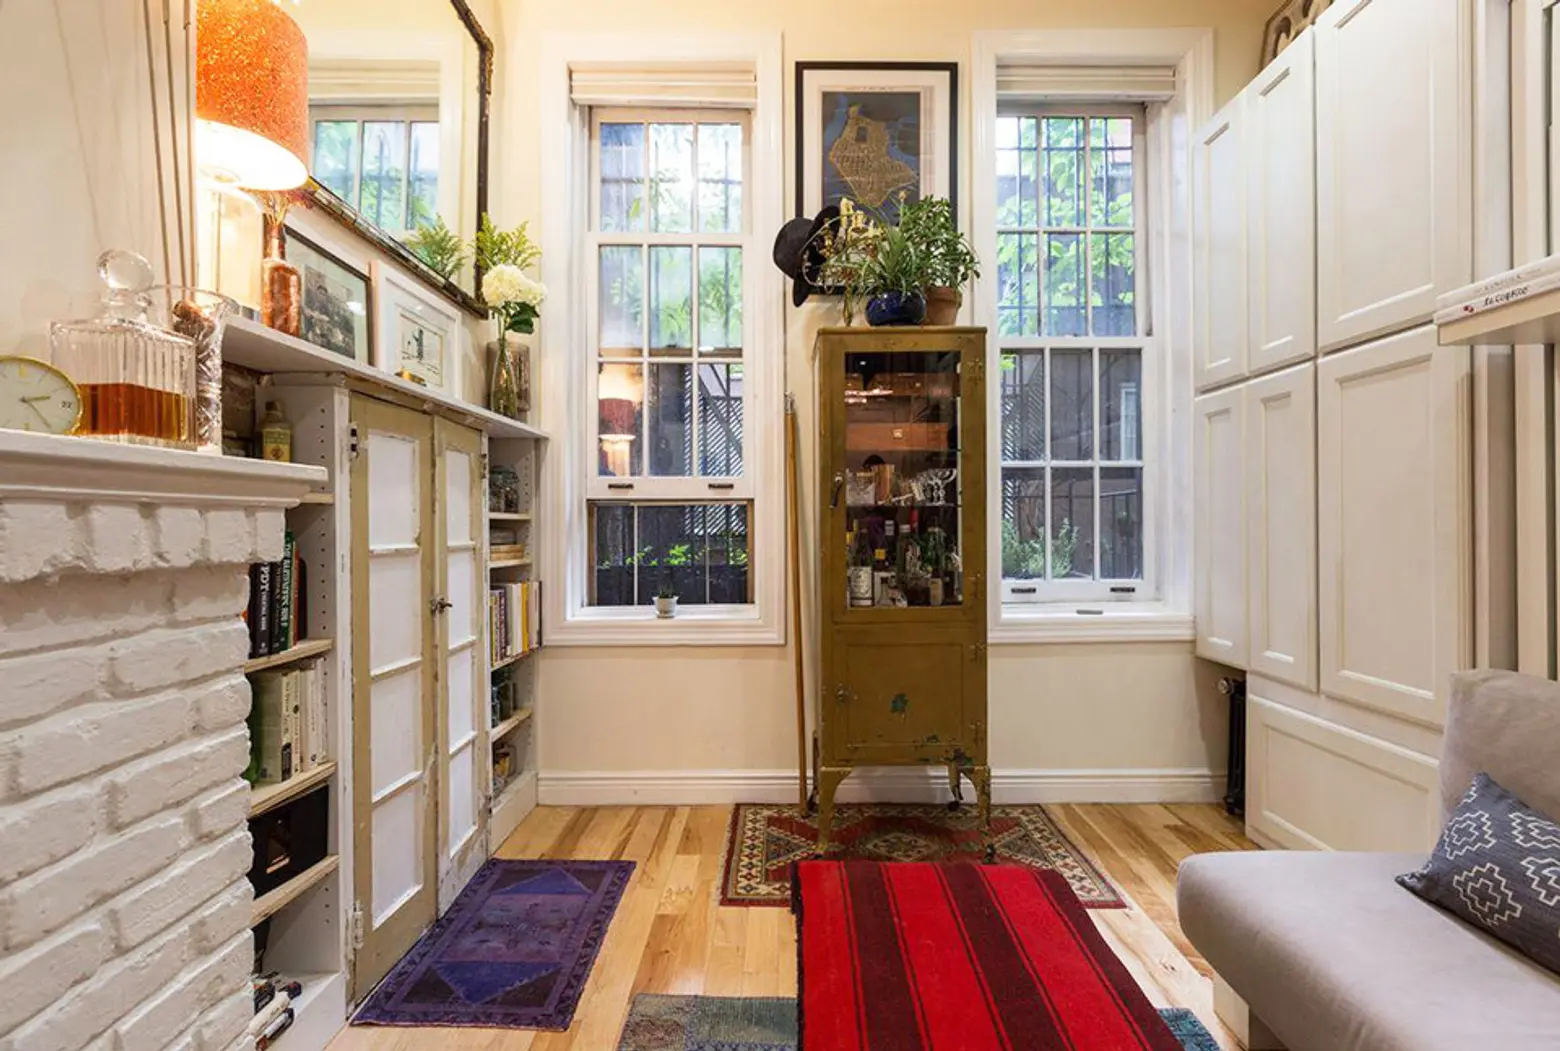 242 Sq Ft NYC, West Village Apartment, apartments under 300 square feet nyc, tiny apartments nyc, studios nyc